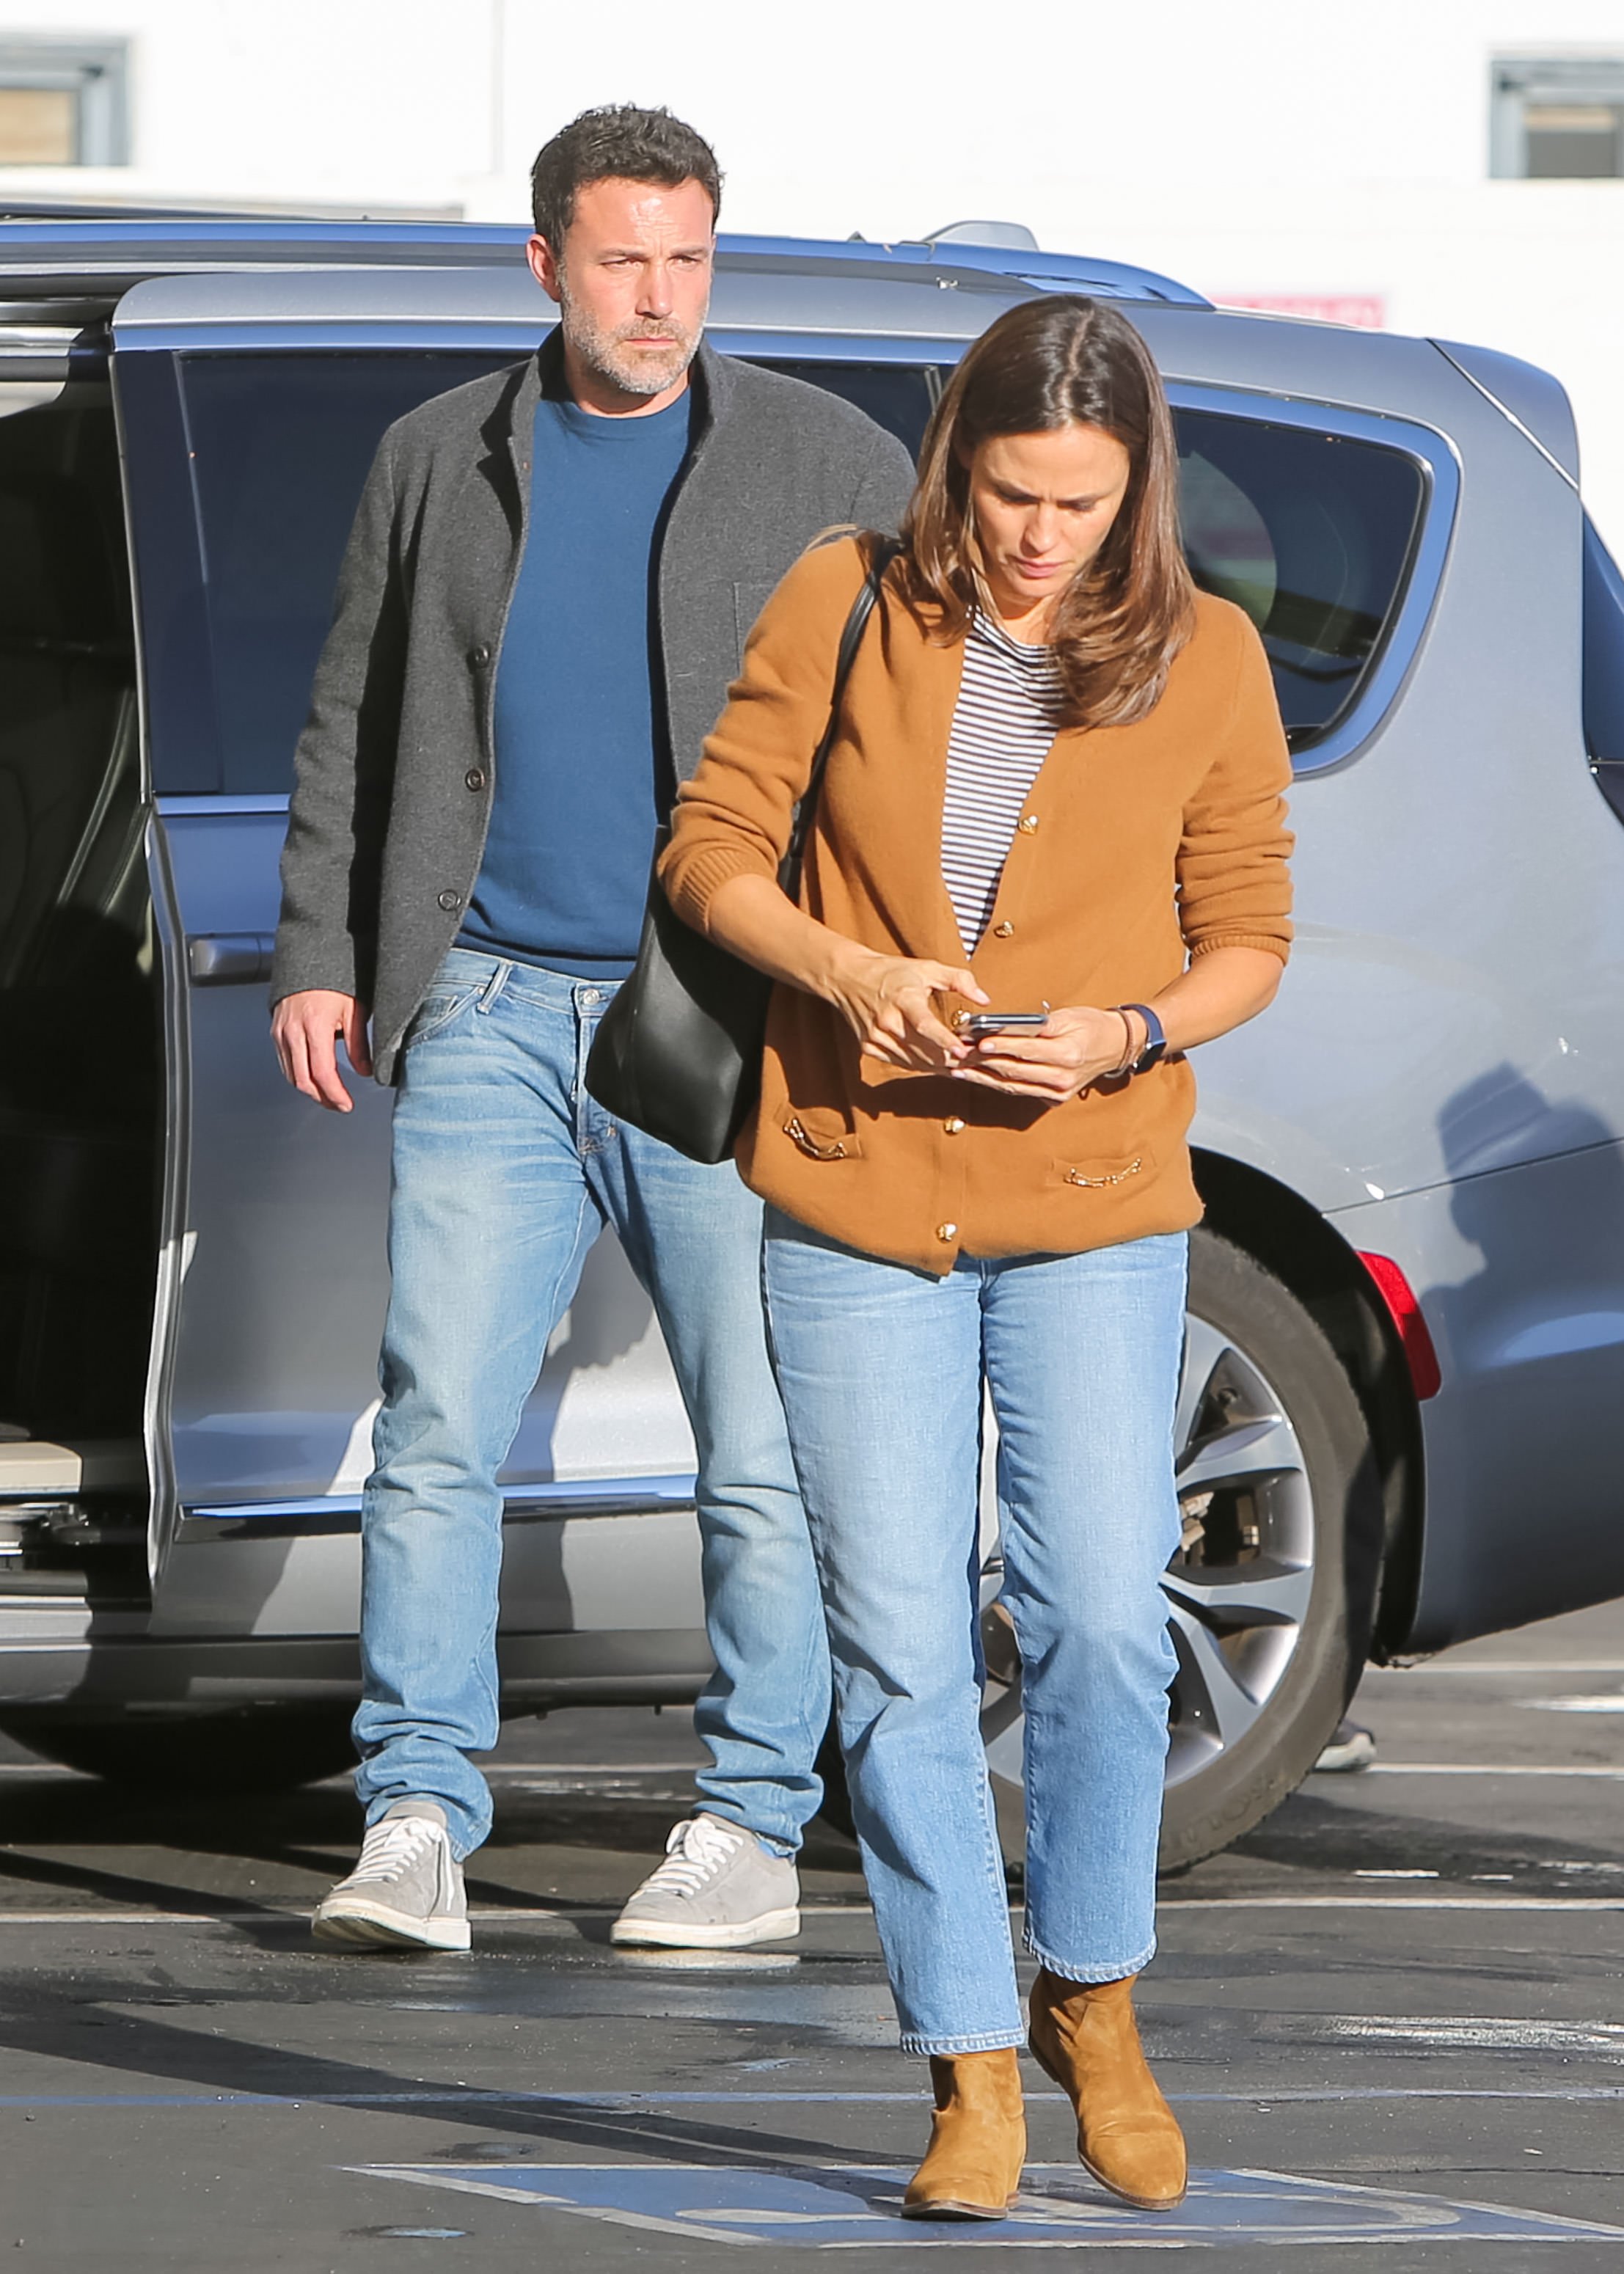 Ben Affleck and Jennifer Garner are seen on November 27, 2019 in Los Angeles, California. | Source: Getty Images